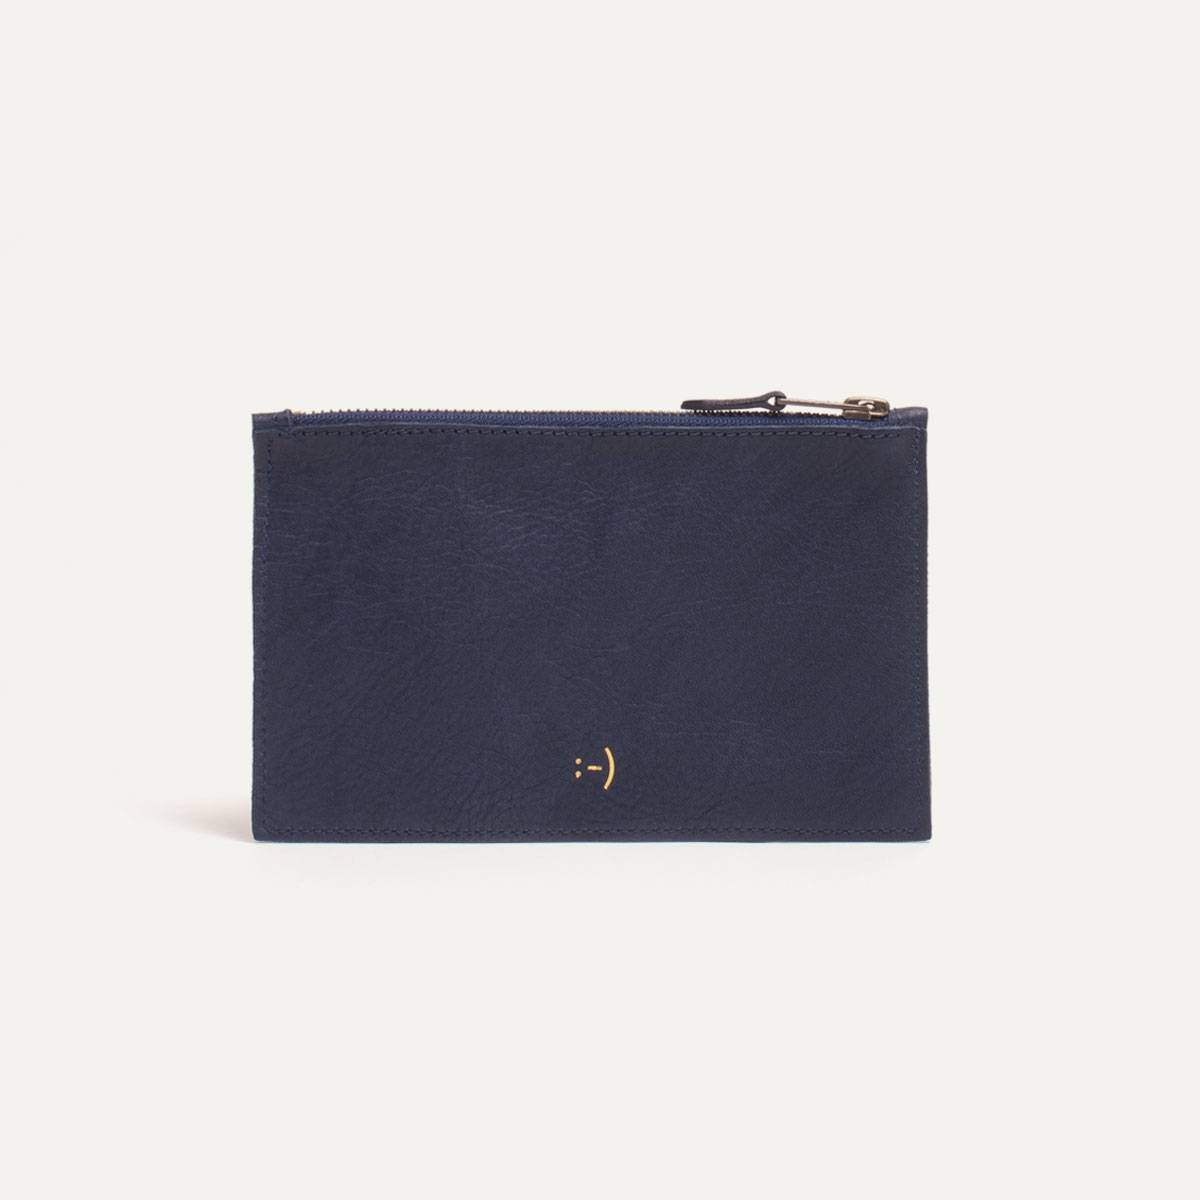 Leather Pouch COSMO S - Navy blue (image n°1)